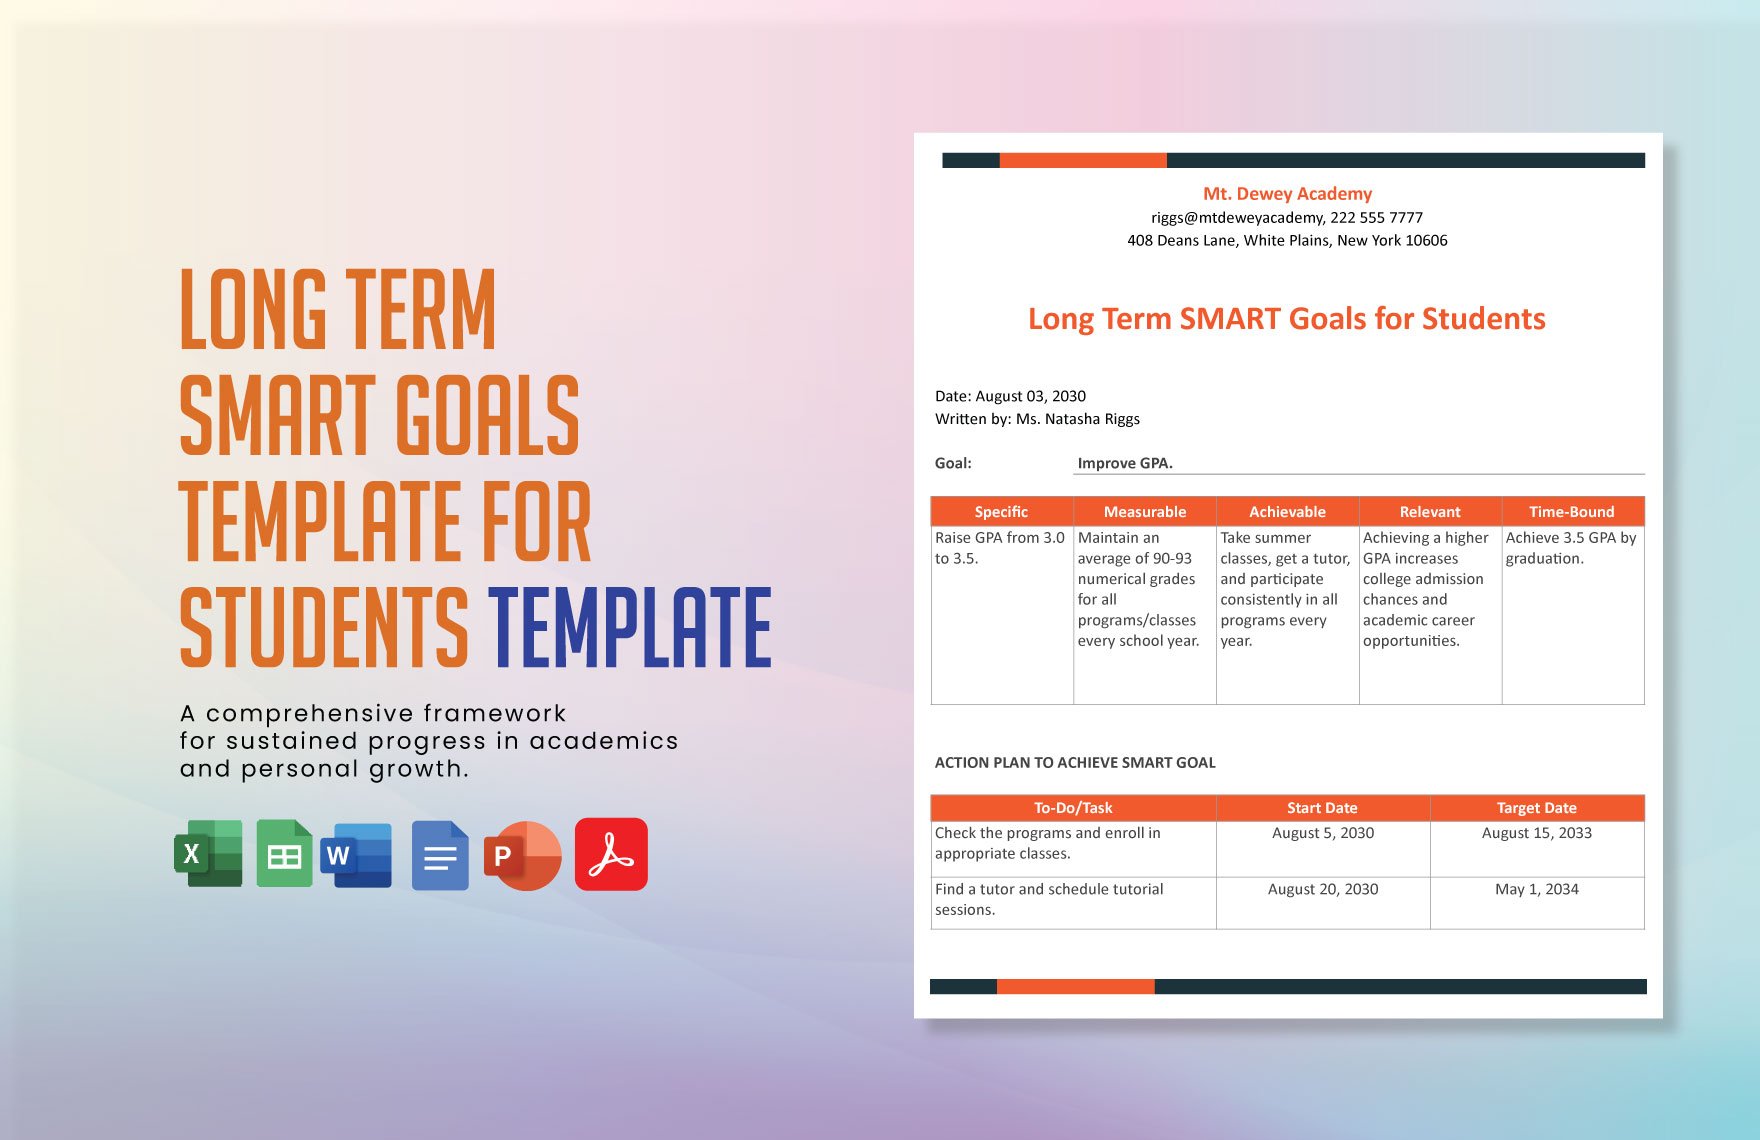 Long Term Smart Goals Template for Students